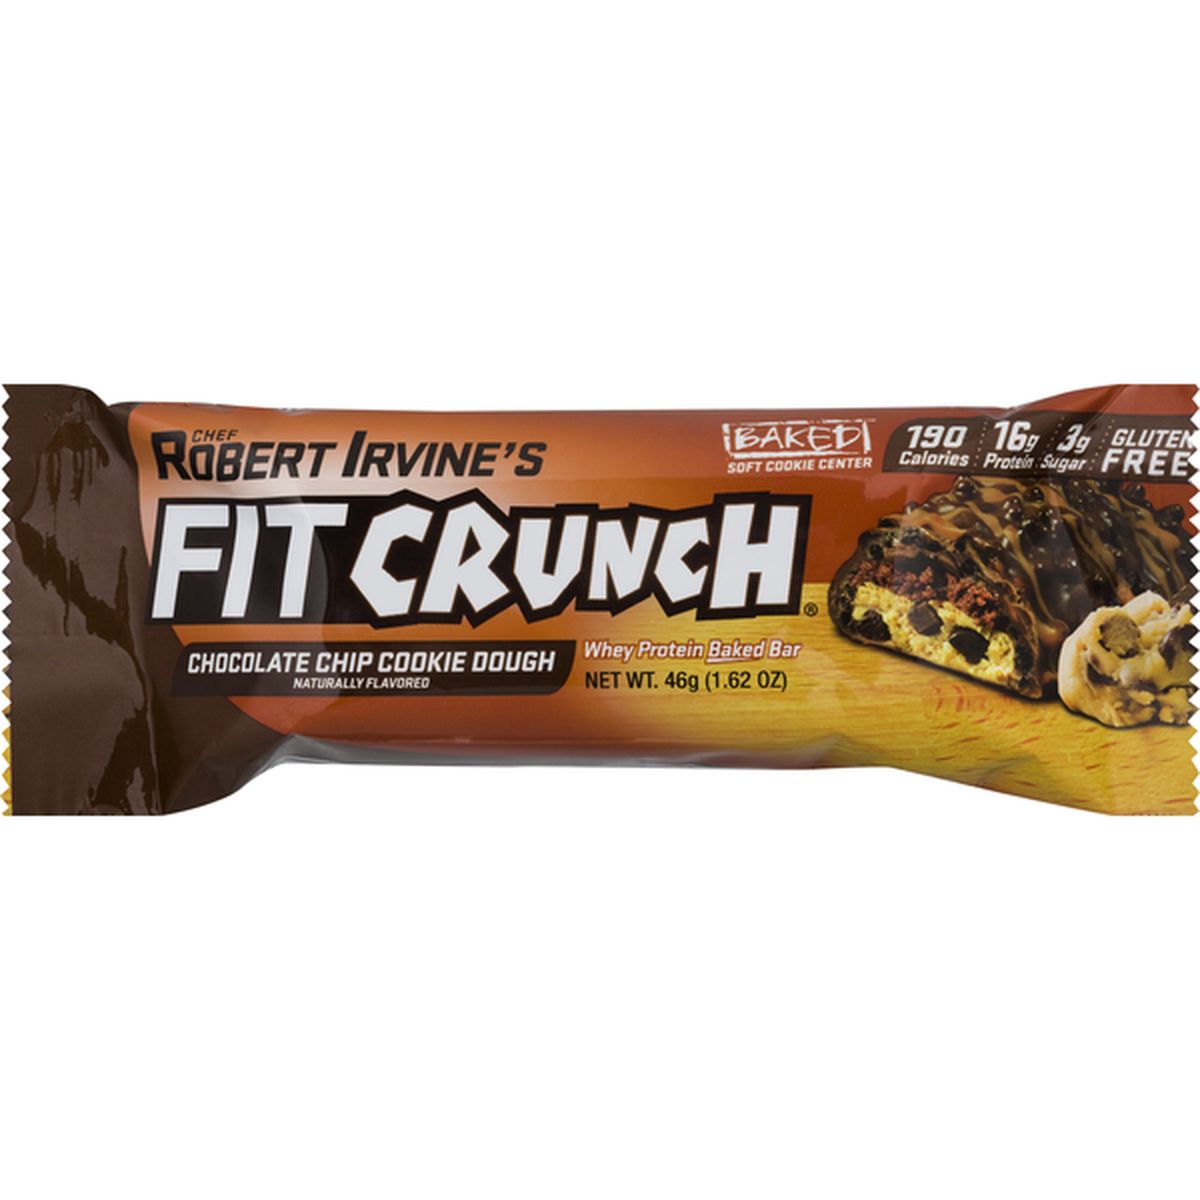 Calories in Fitcrunch Baked Bar, Whey Protein, Gluten Free, Chocolate Chip Cookie Dough